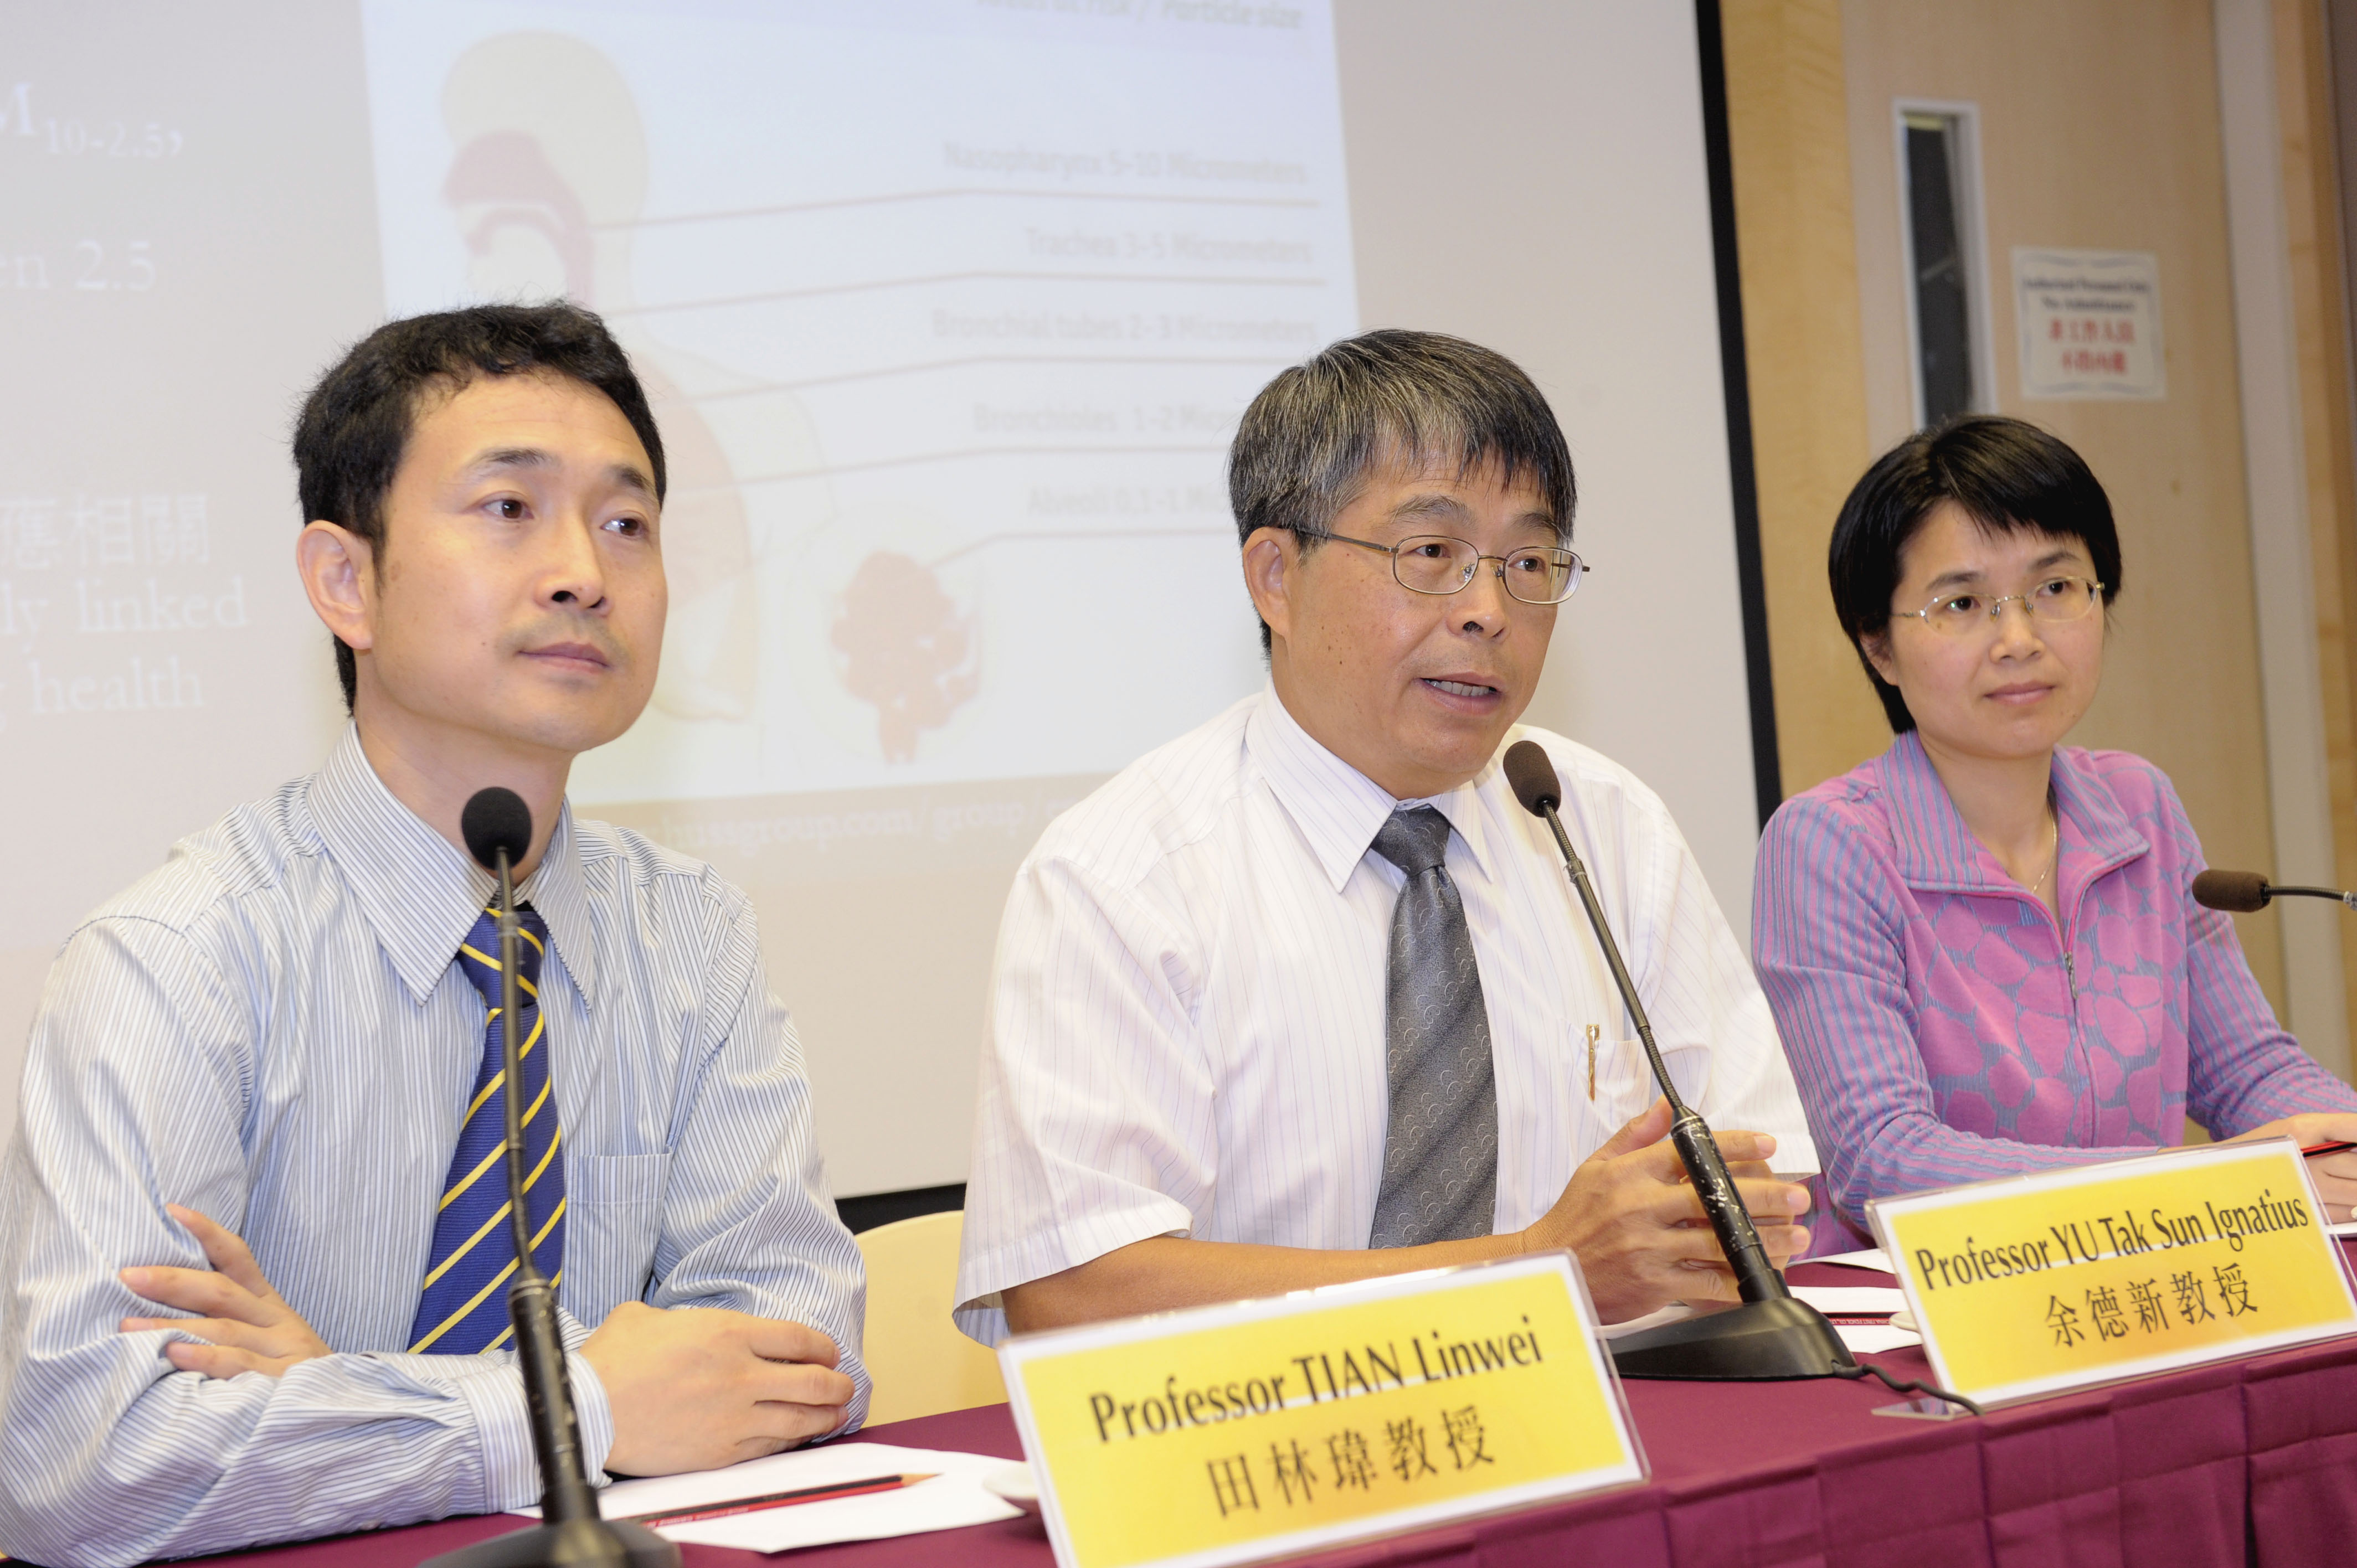 (From left) Prof. Tian Linwei, Assistant Professor; Prof. Yu Tak Sun Ignatius, Head; and Ms. Qiu Hong, PhD Candidate, Division of Occupational and Environmental Health, the Jockey Club School of Public Health and Primary Care at CUHK present their recent research on 'Effects of Coarse Particulate Matter on Emergency Hospital Admissions for Respiratory Diseases' and recommend Hong Kong's New Air Quality Objectives should not ignore coarse particulate pollutants